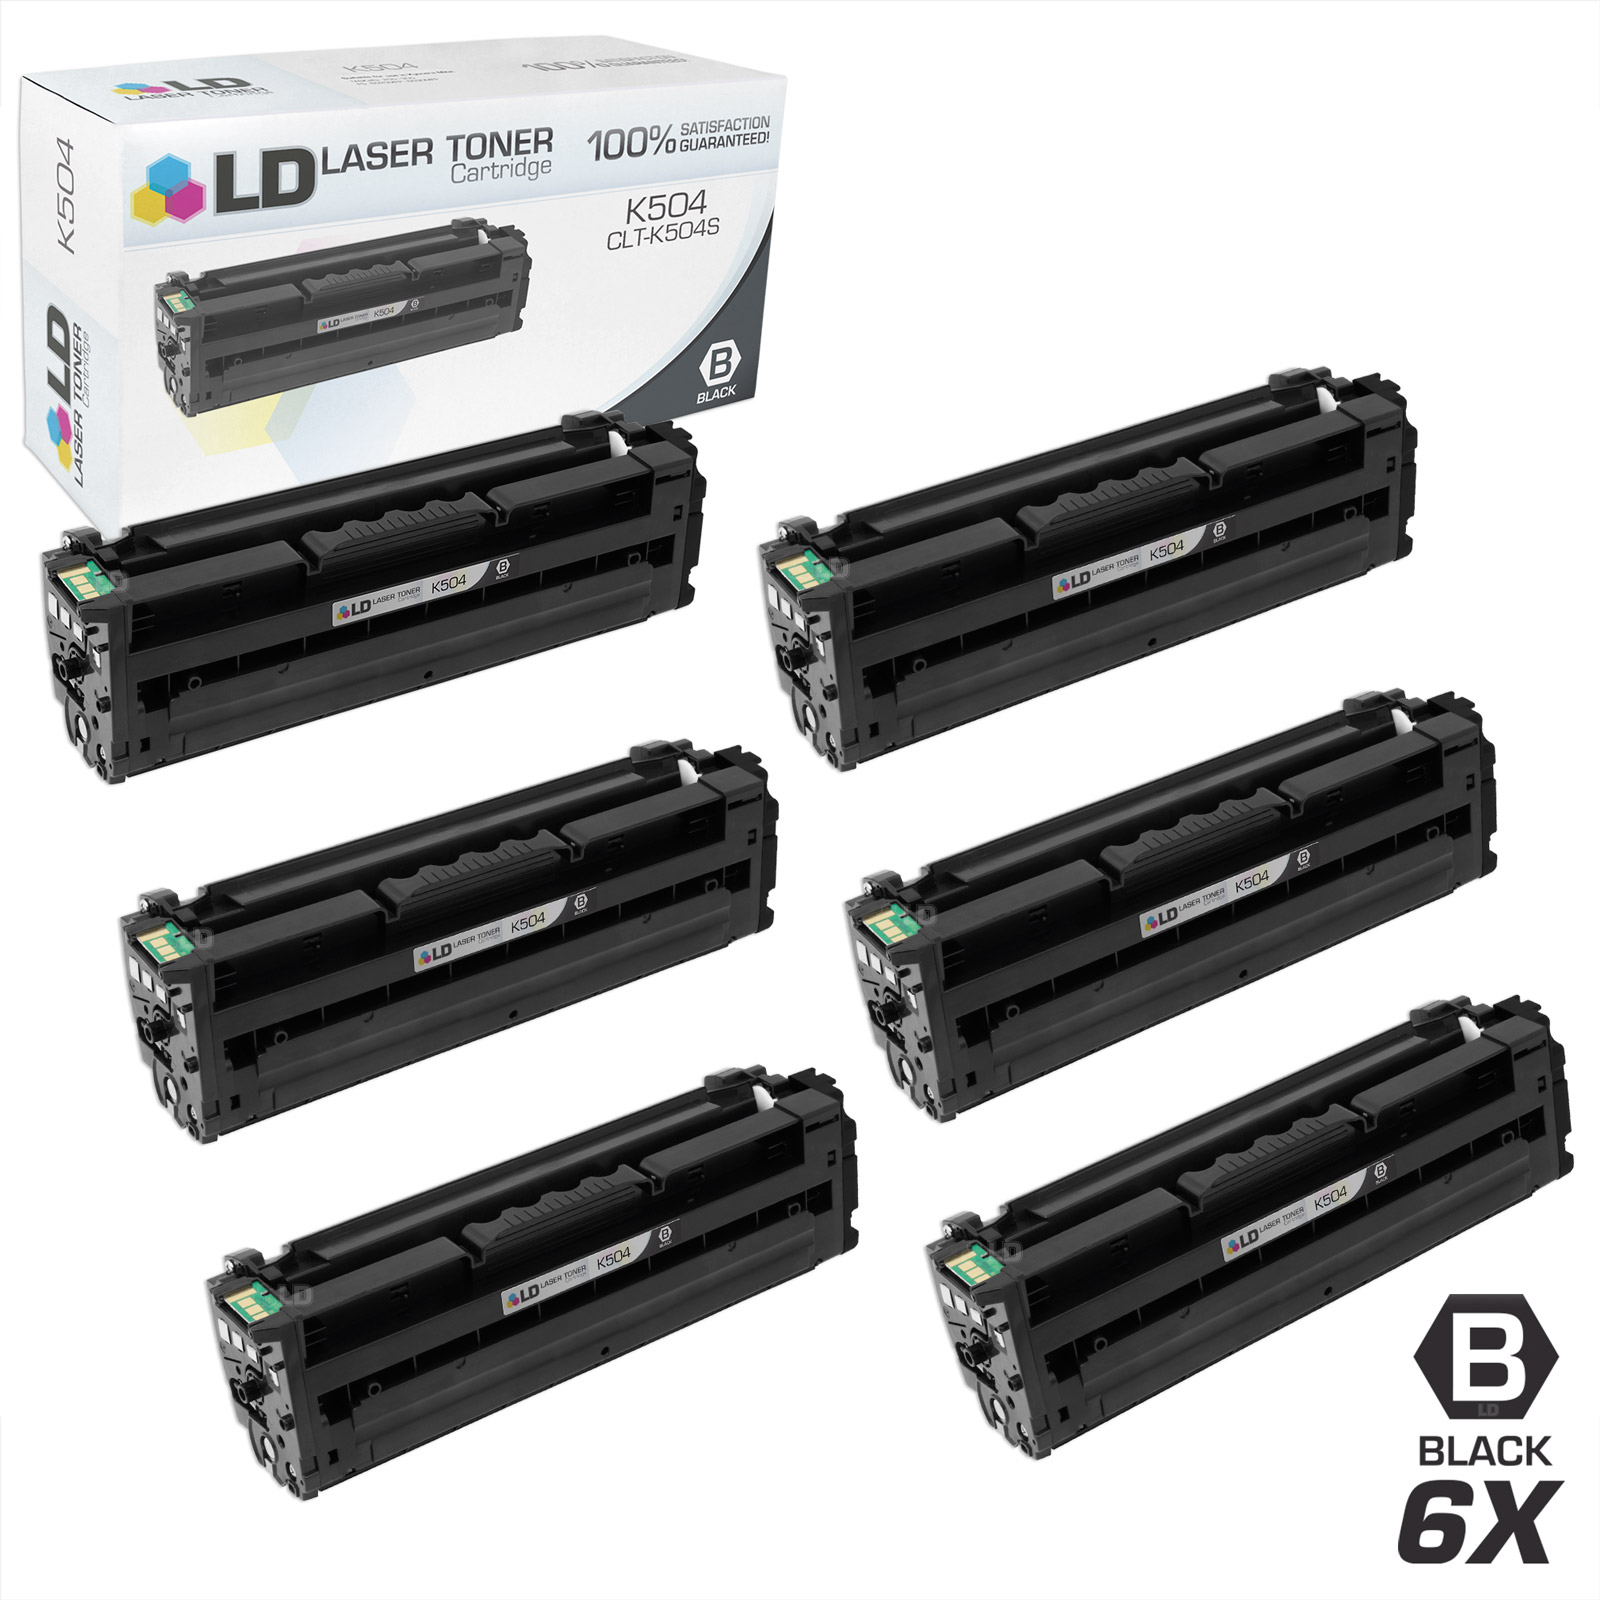 LD Products Compatible Replacements for Samsung CLP/CLX/SL Set of 6 Black Laser Toner Cartridges: 6 CLT-K504S Black - image 1 of 1